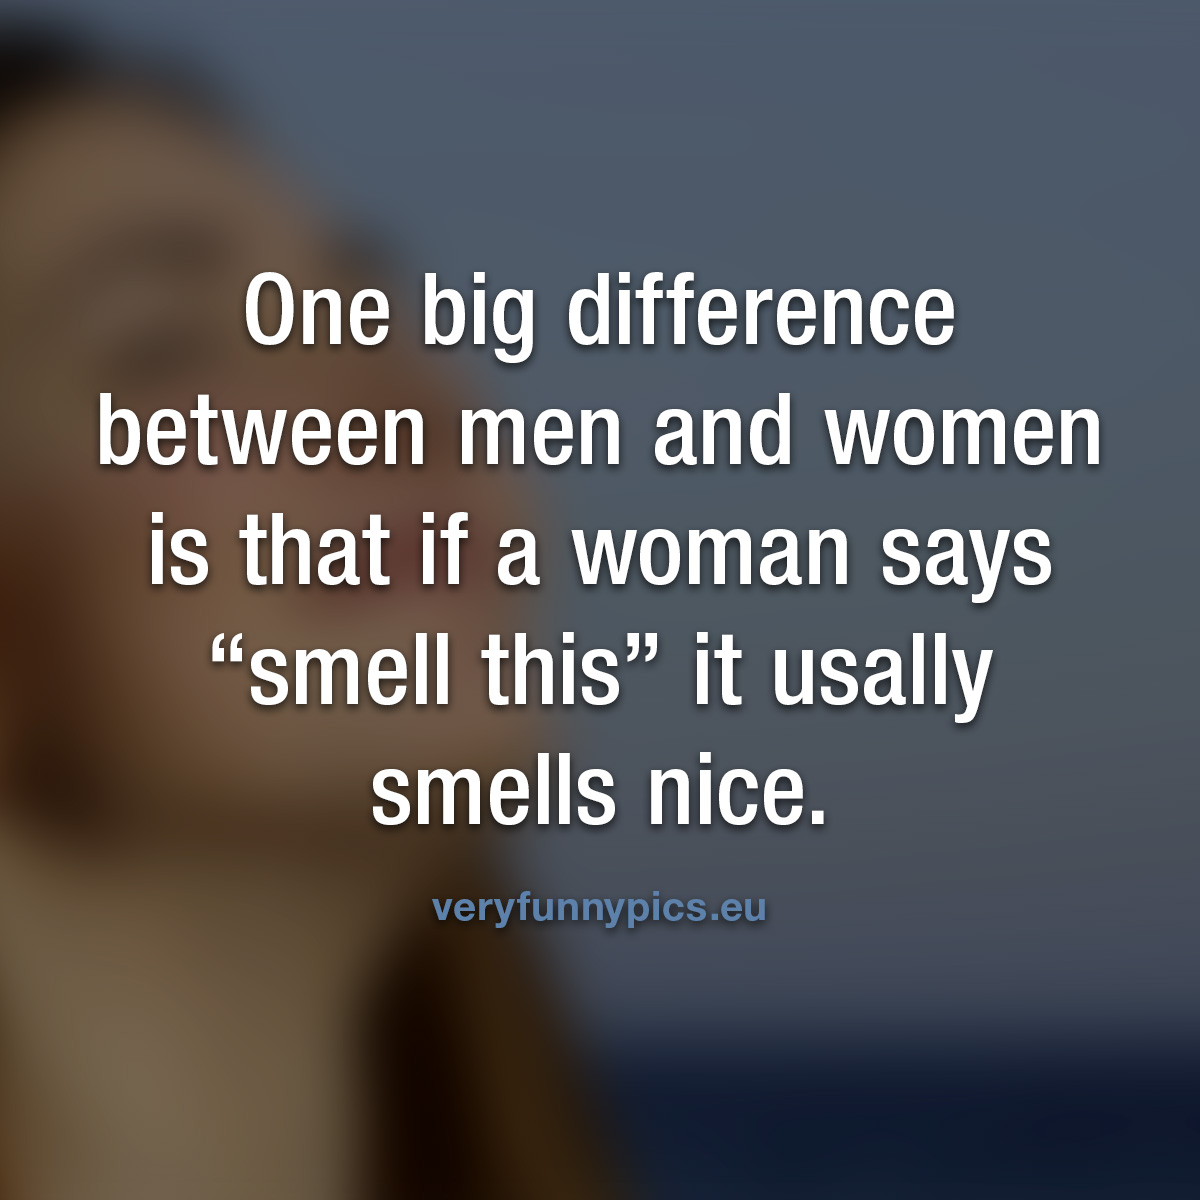 Quote about difference between men and women